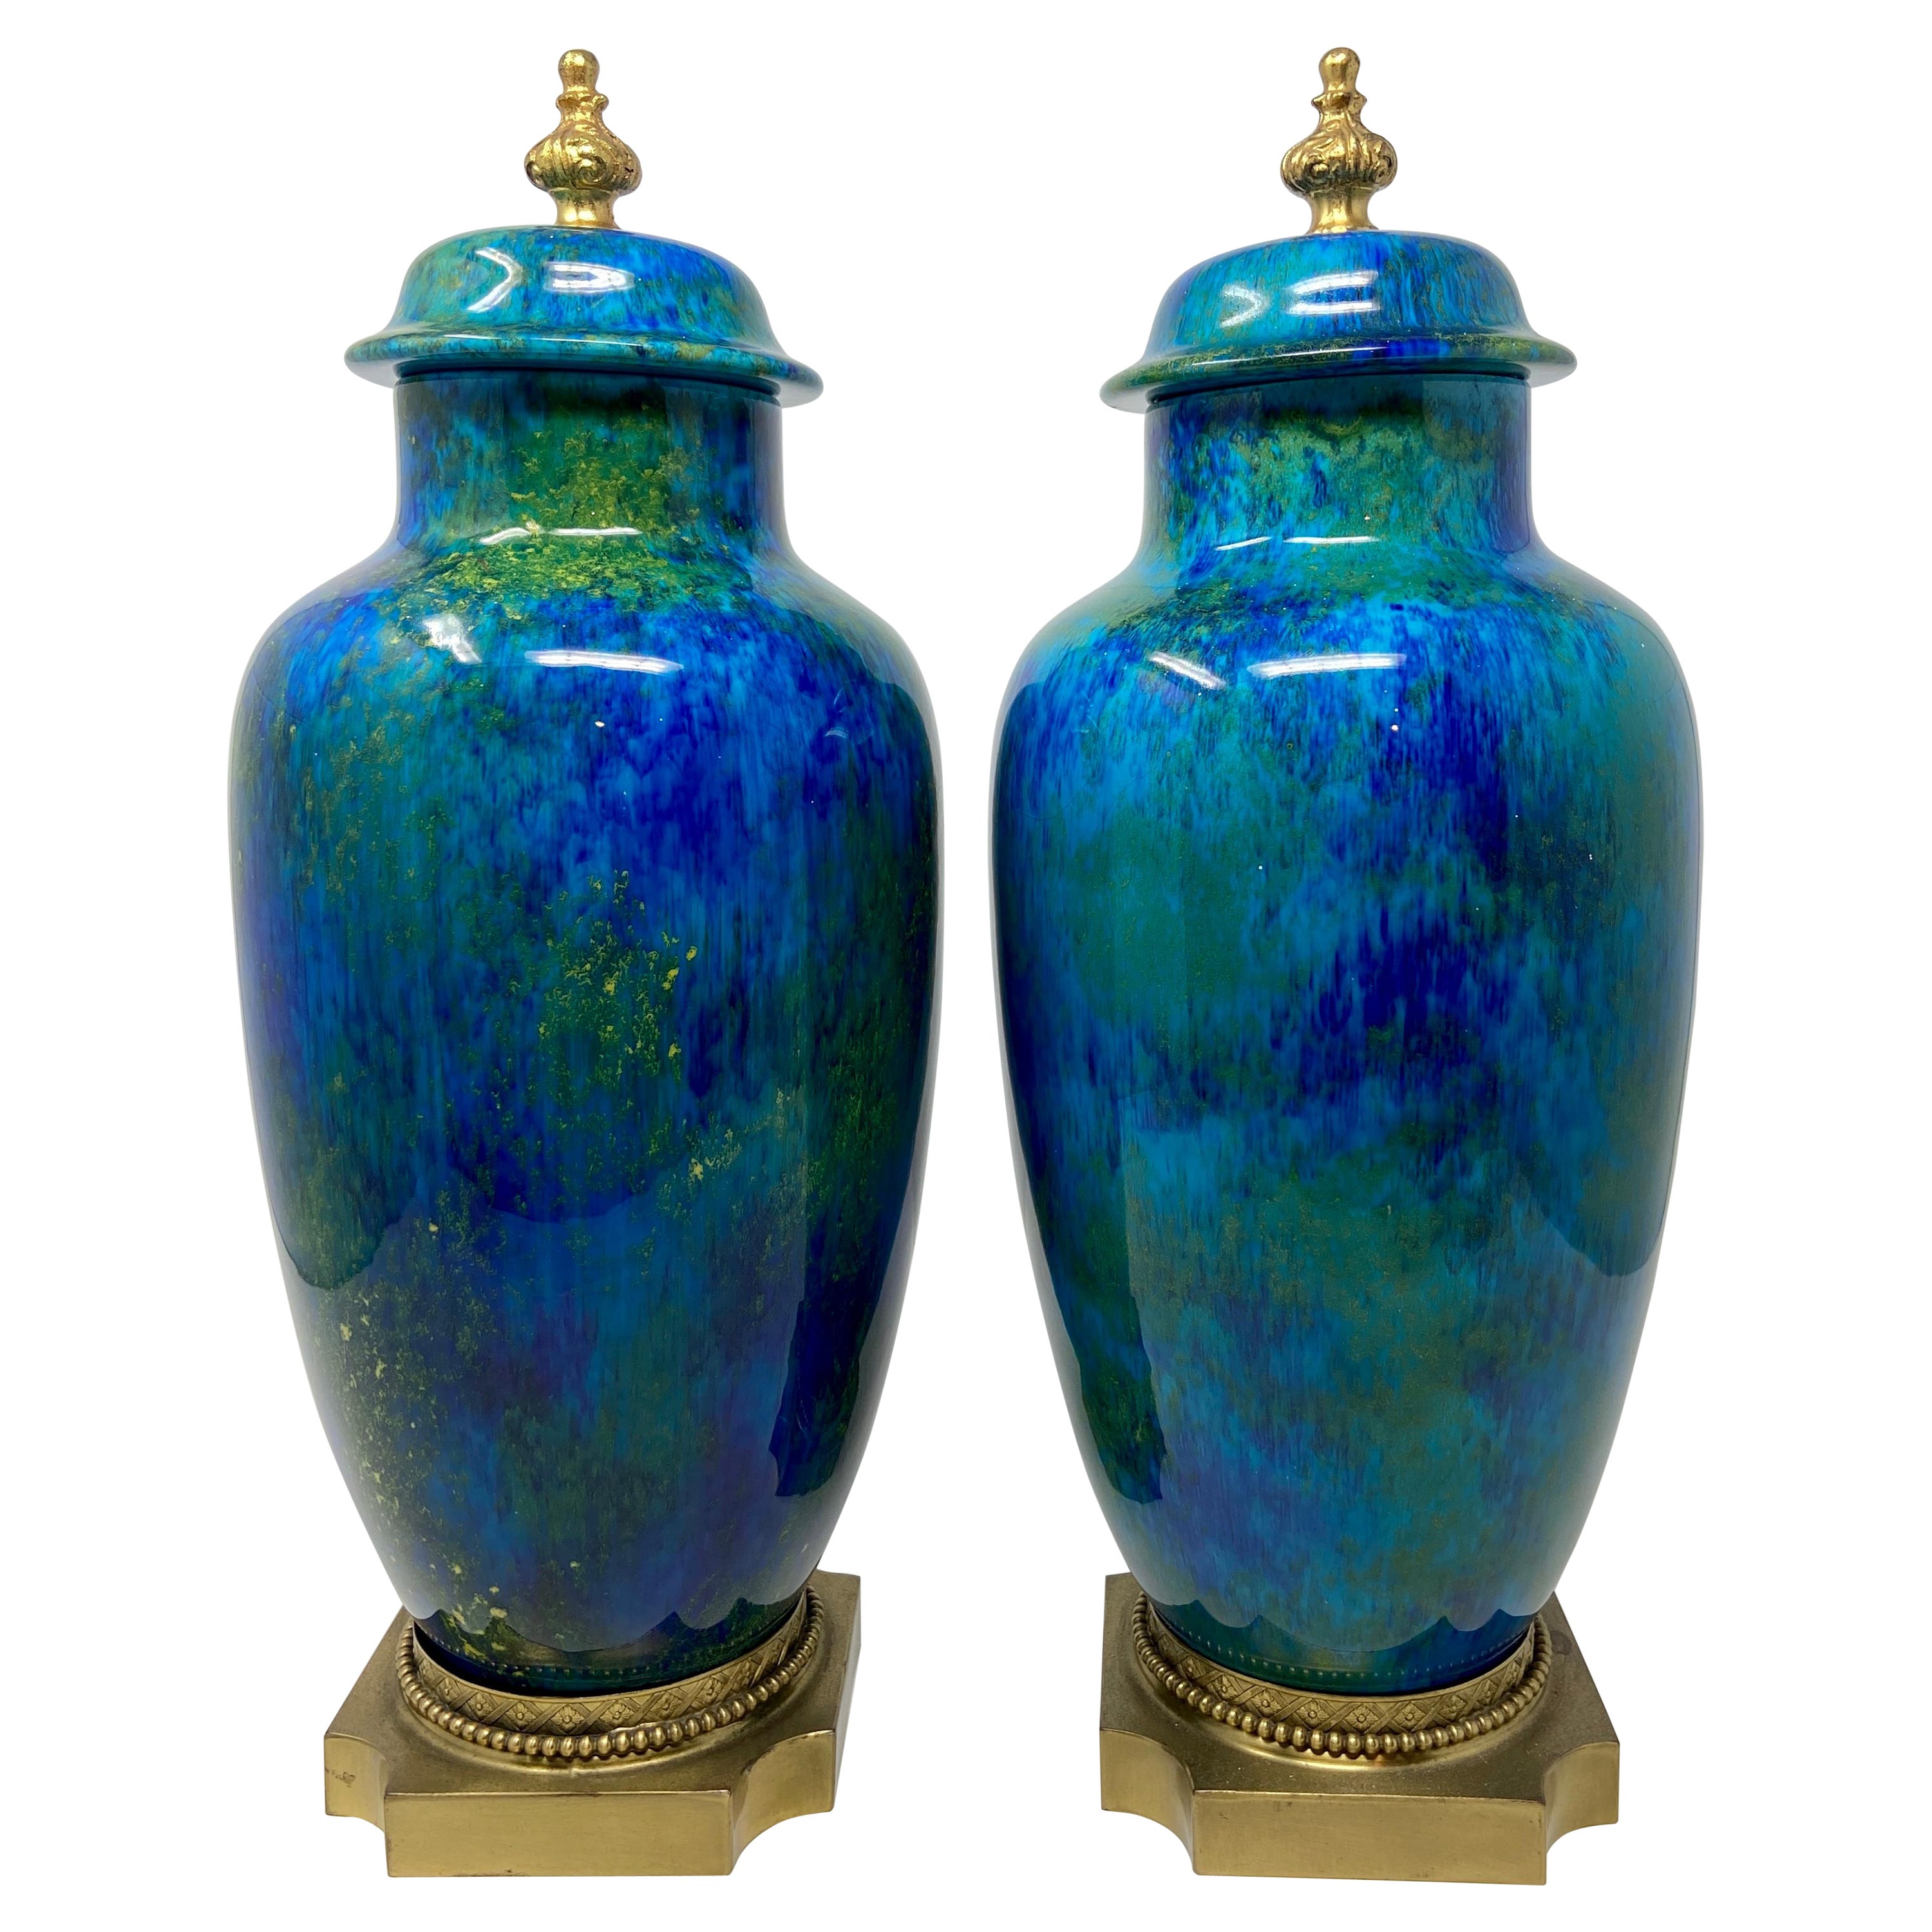 Pair Antique French "Art Nouveau" Porcelain Urns Made by Sevres, Circa 1910-1920 For Sale